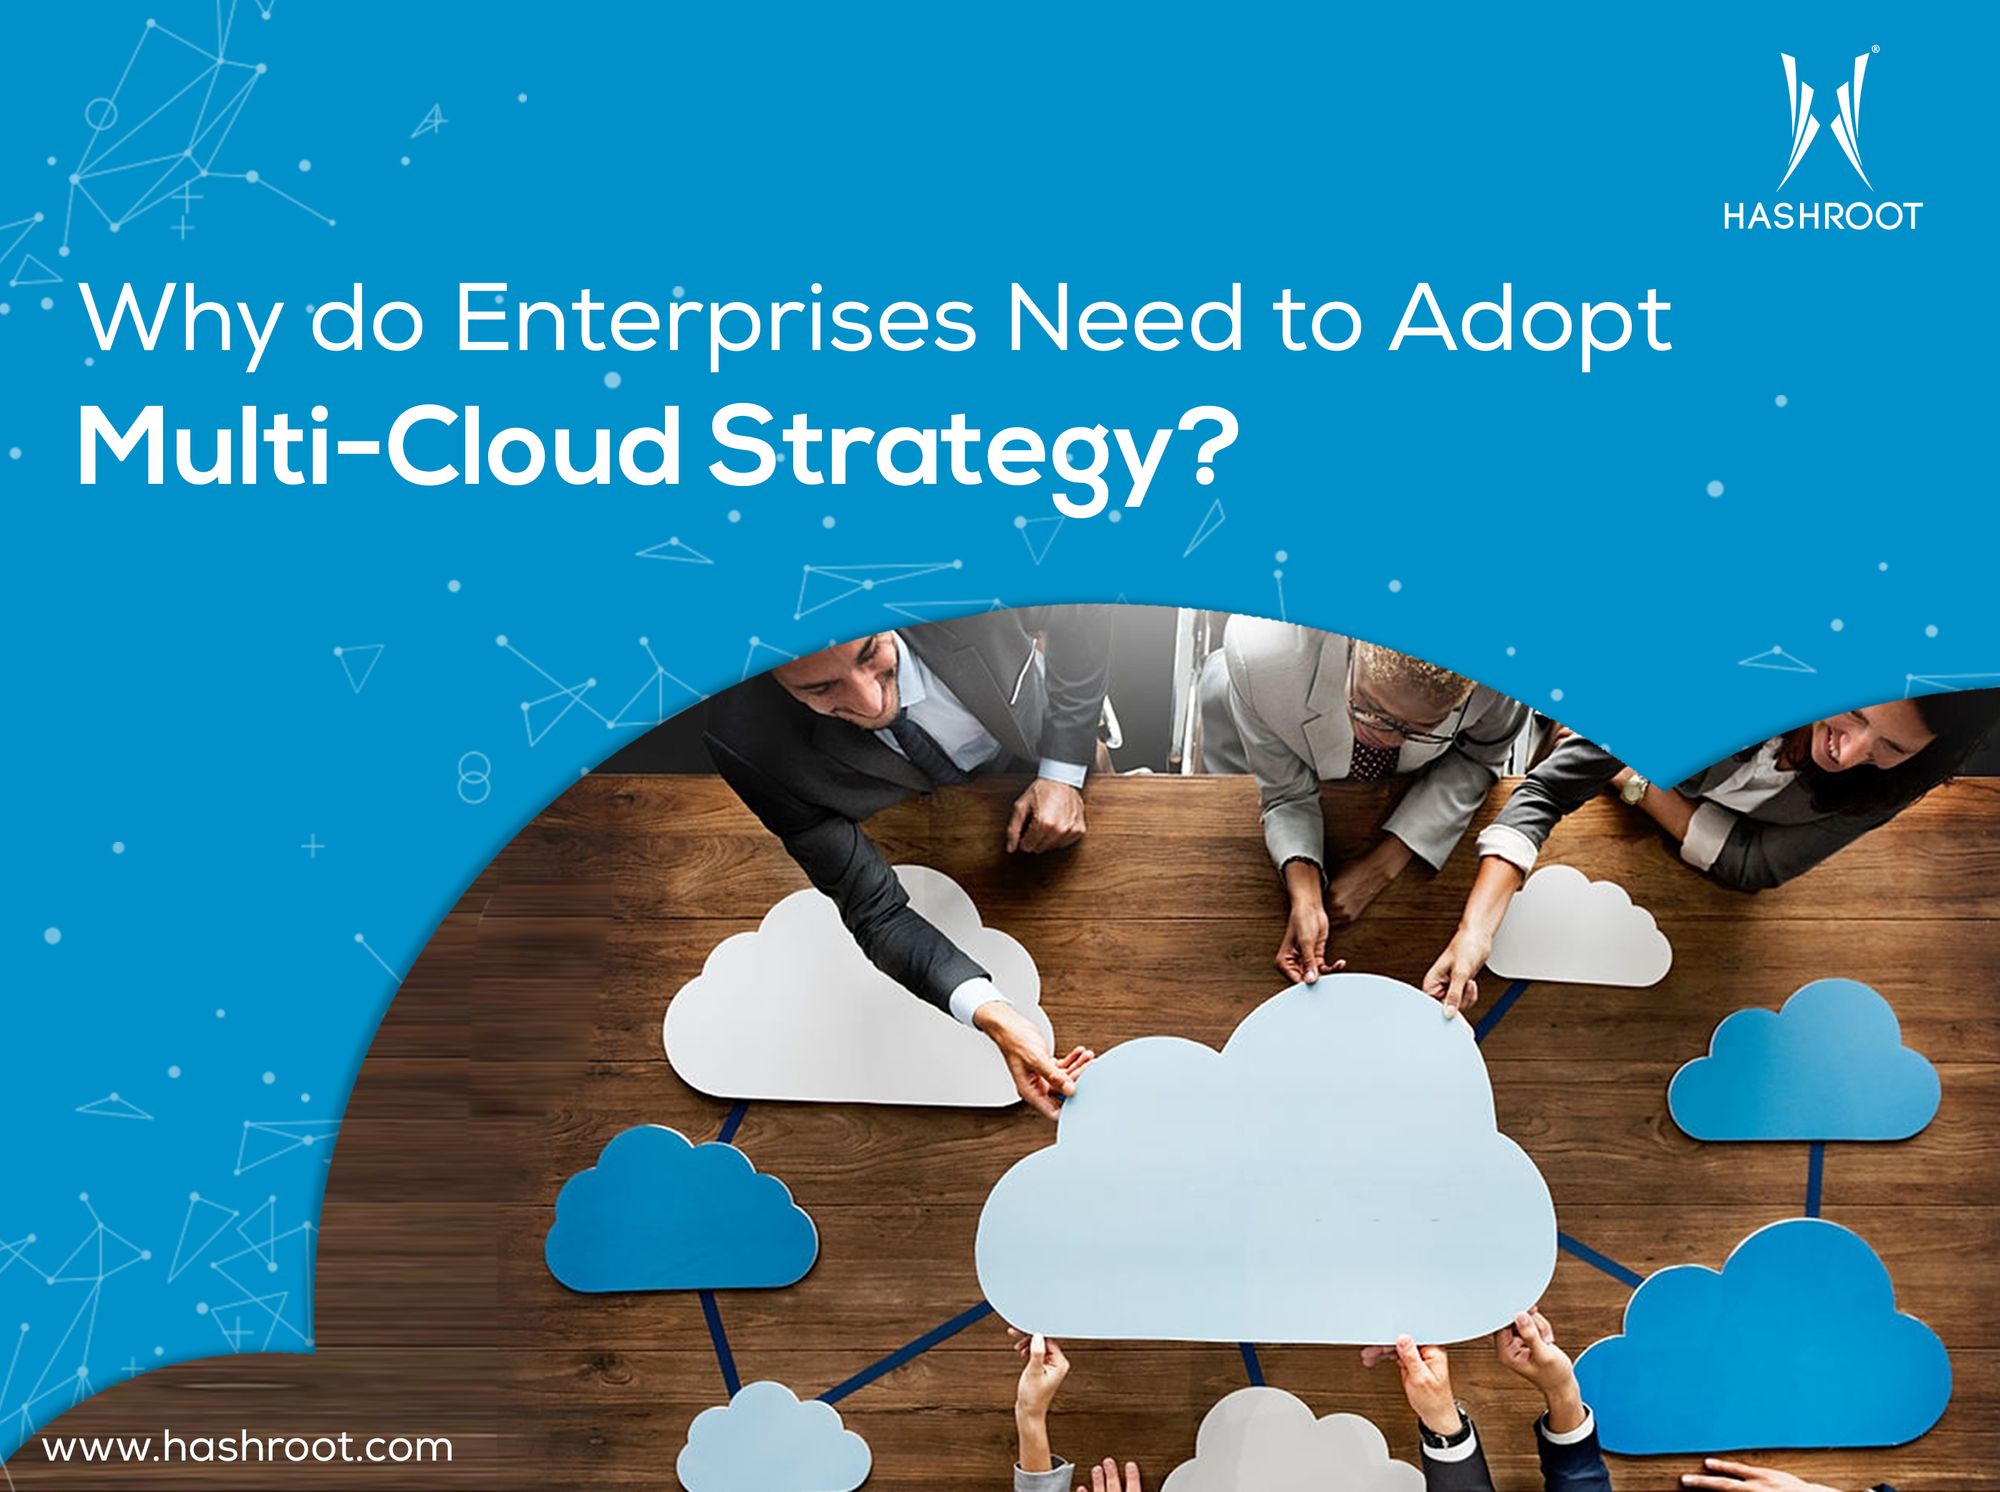 Why do Enterprises Need to Adopt Multi-Cloud Strategy?